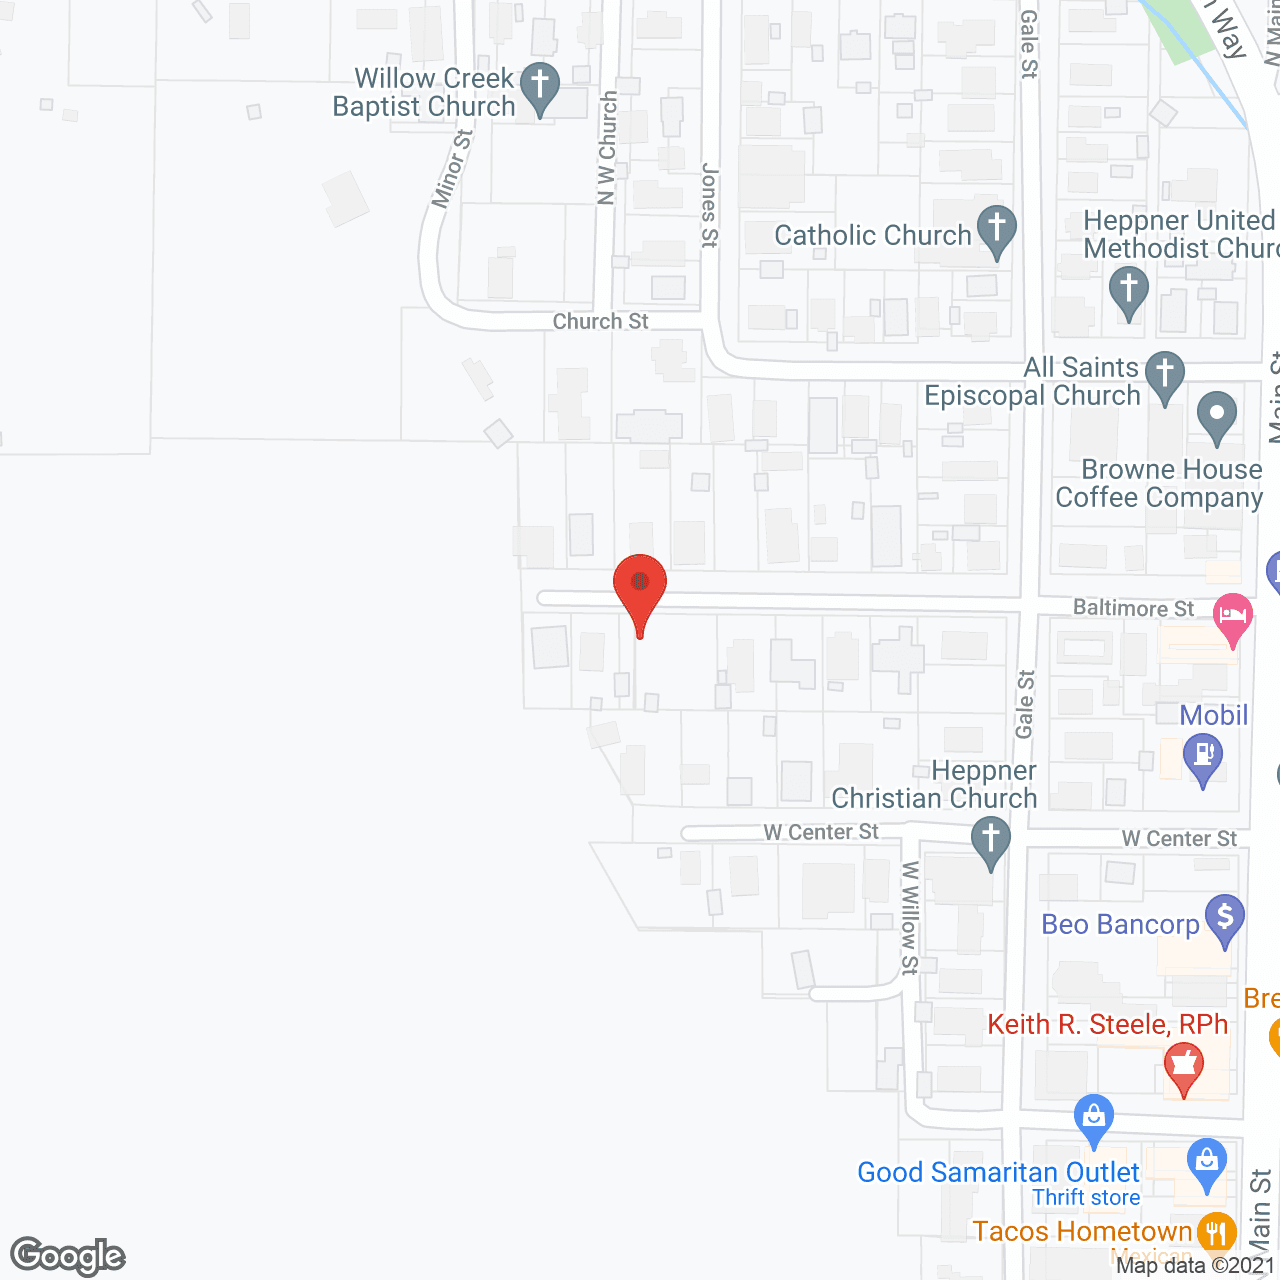 CWS-Test wrong CID - DO NOT CHANGE/REFER in google map